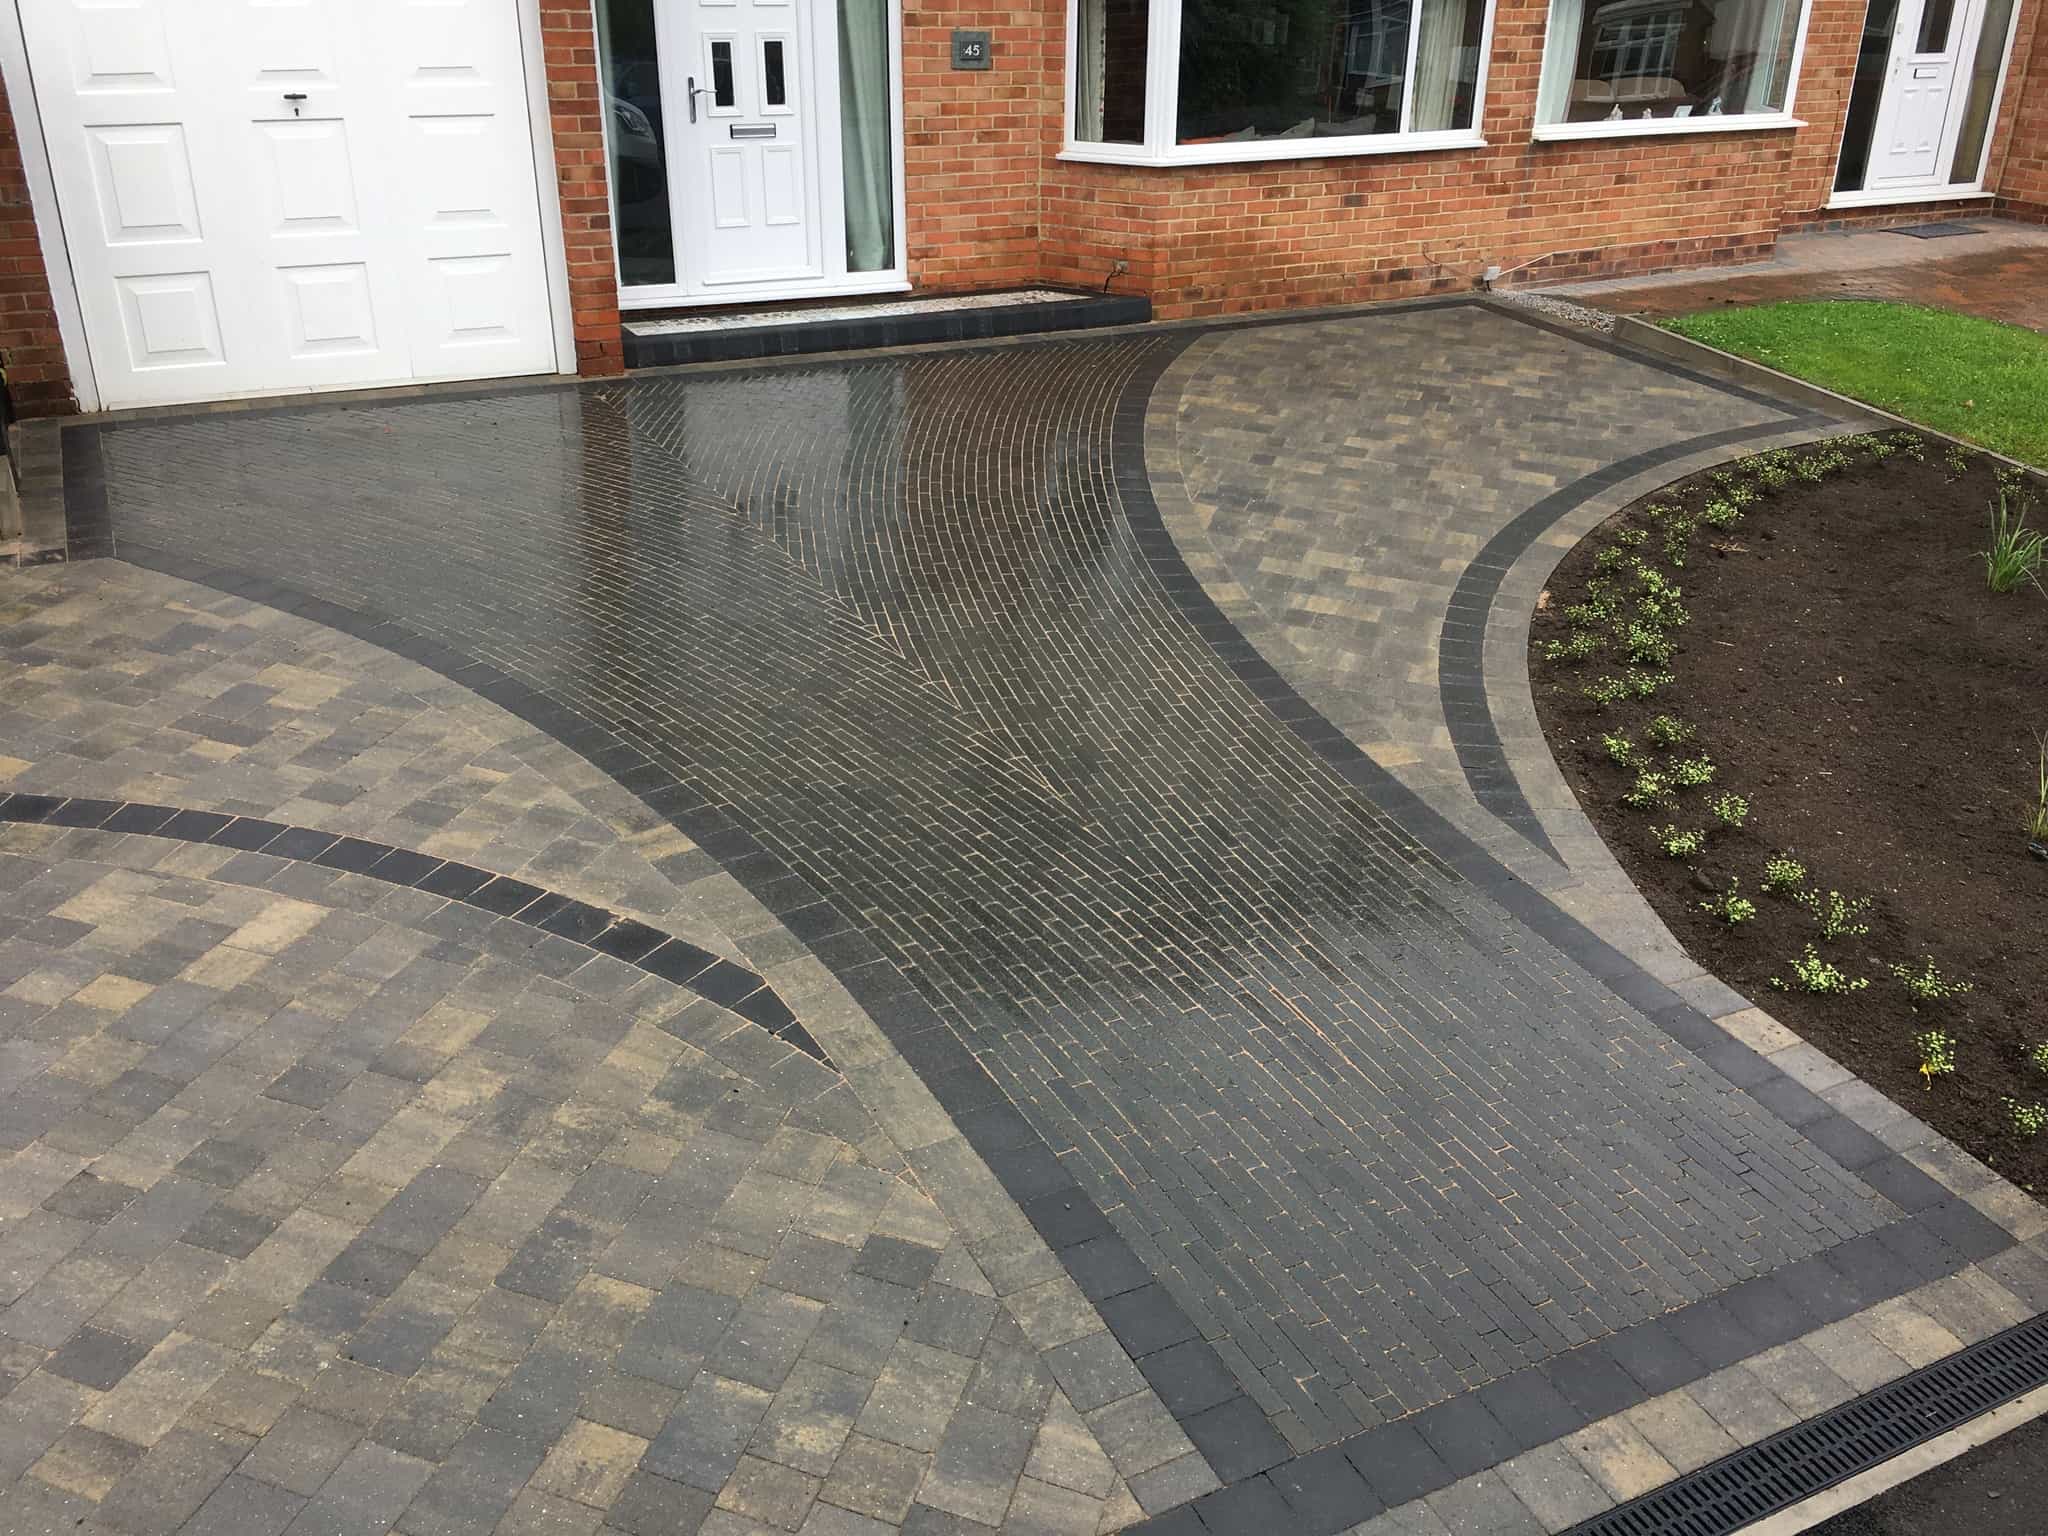 Main photo for Brighouse Driveways Ltd